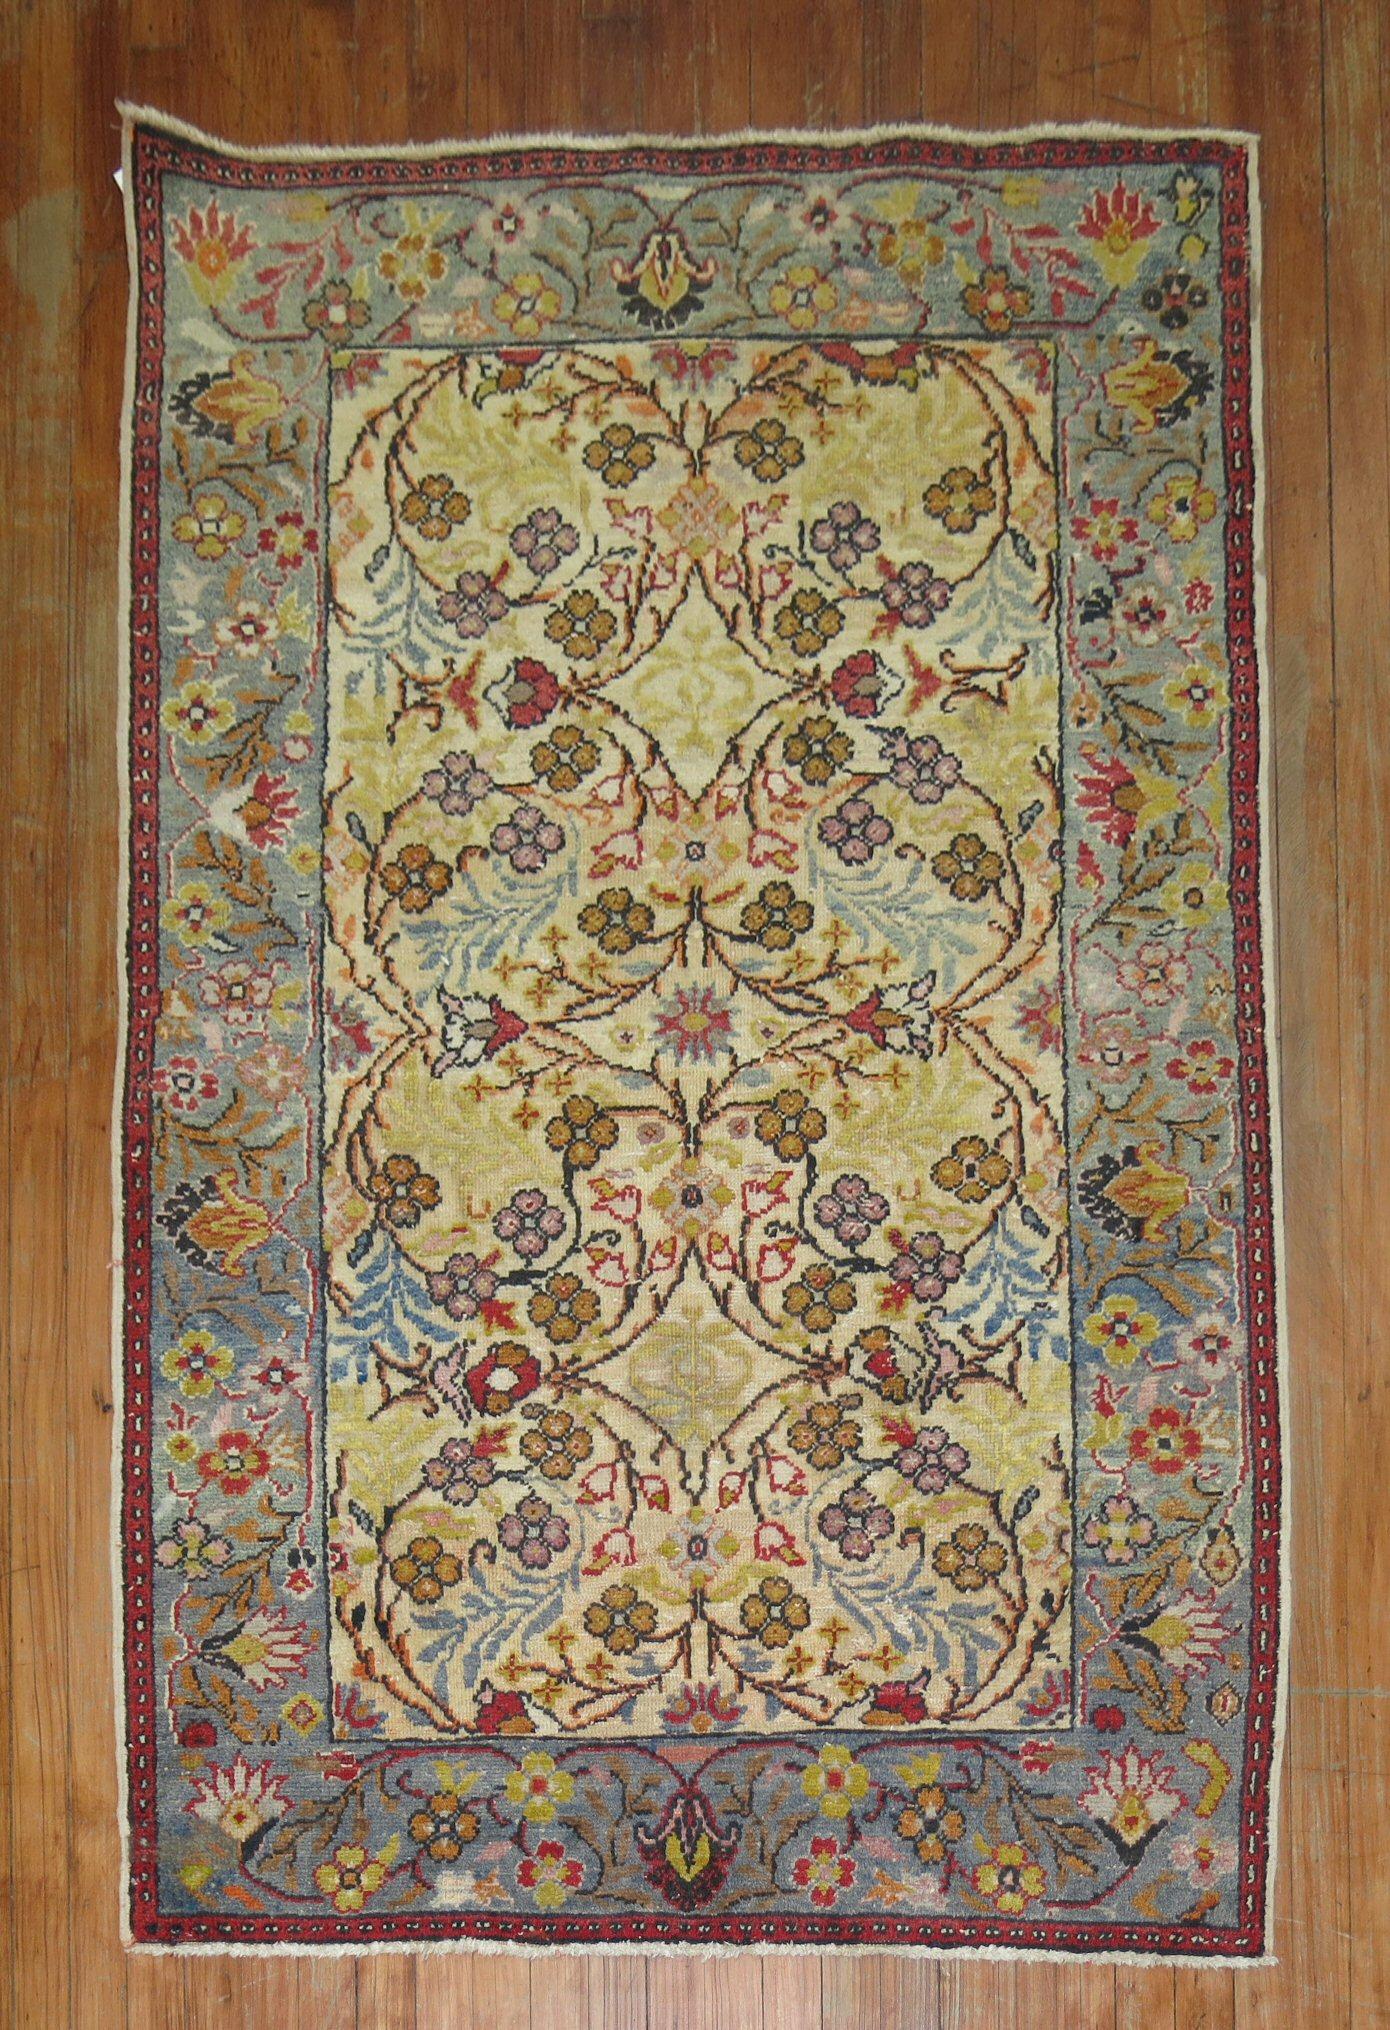 Mid-20th Century Turkish Rug with an elegant floral design throoughout.

Measures: 3'9'' x 5'6''